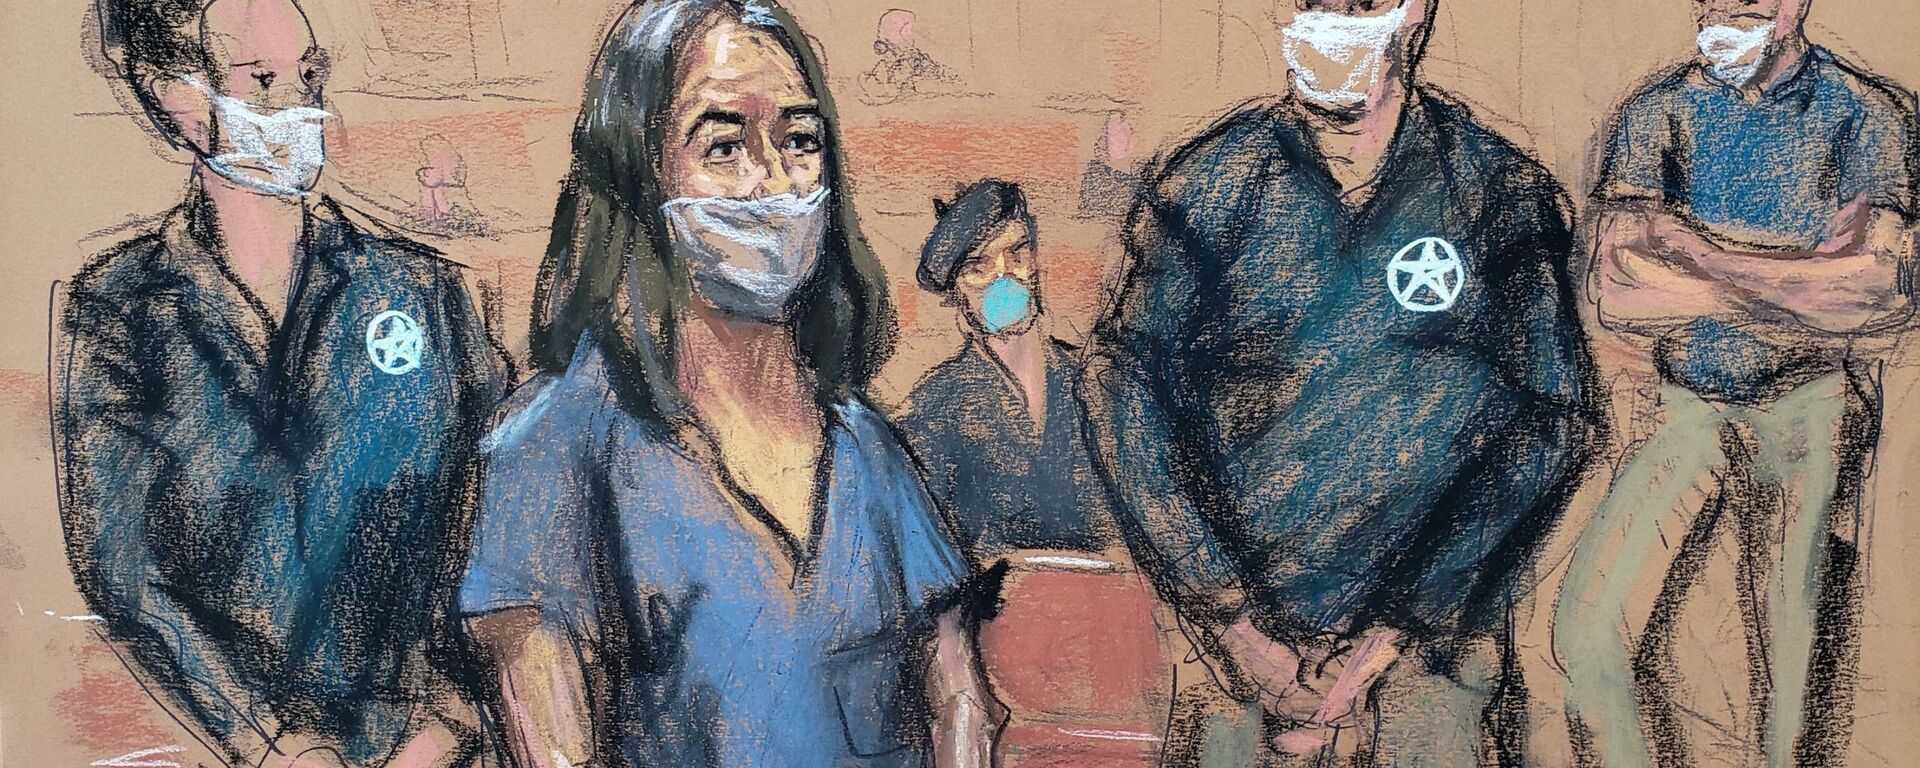 British socialite Ghislaine Maxwell appears during her arraignment hearing on a new indictment at Manhattan Federal Court in New York City, New York, U.S. April 23, 2021, in this courtroom sketch. - Sputnik International, 1920, 21.11.2021